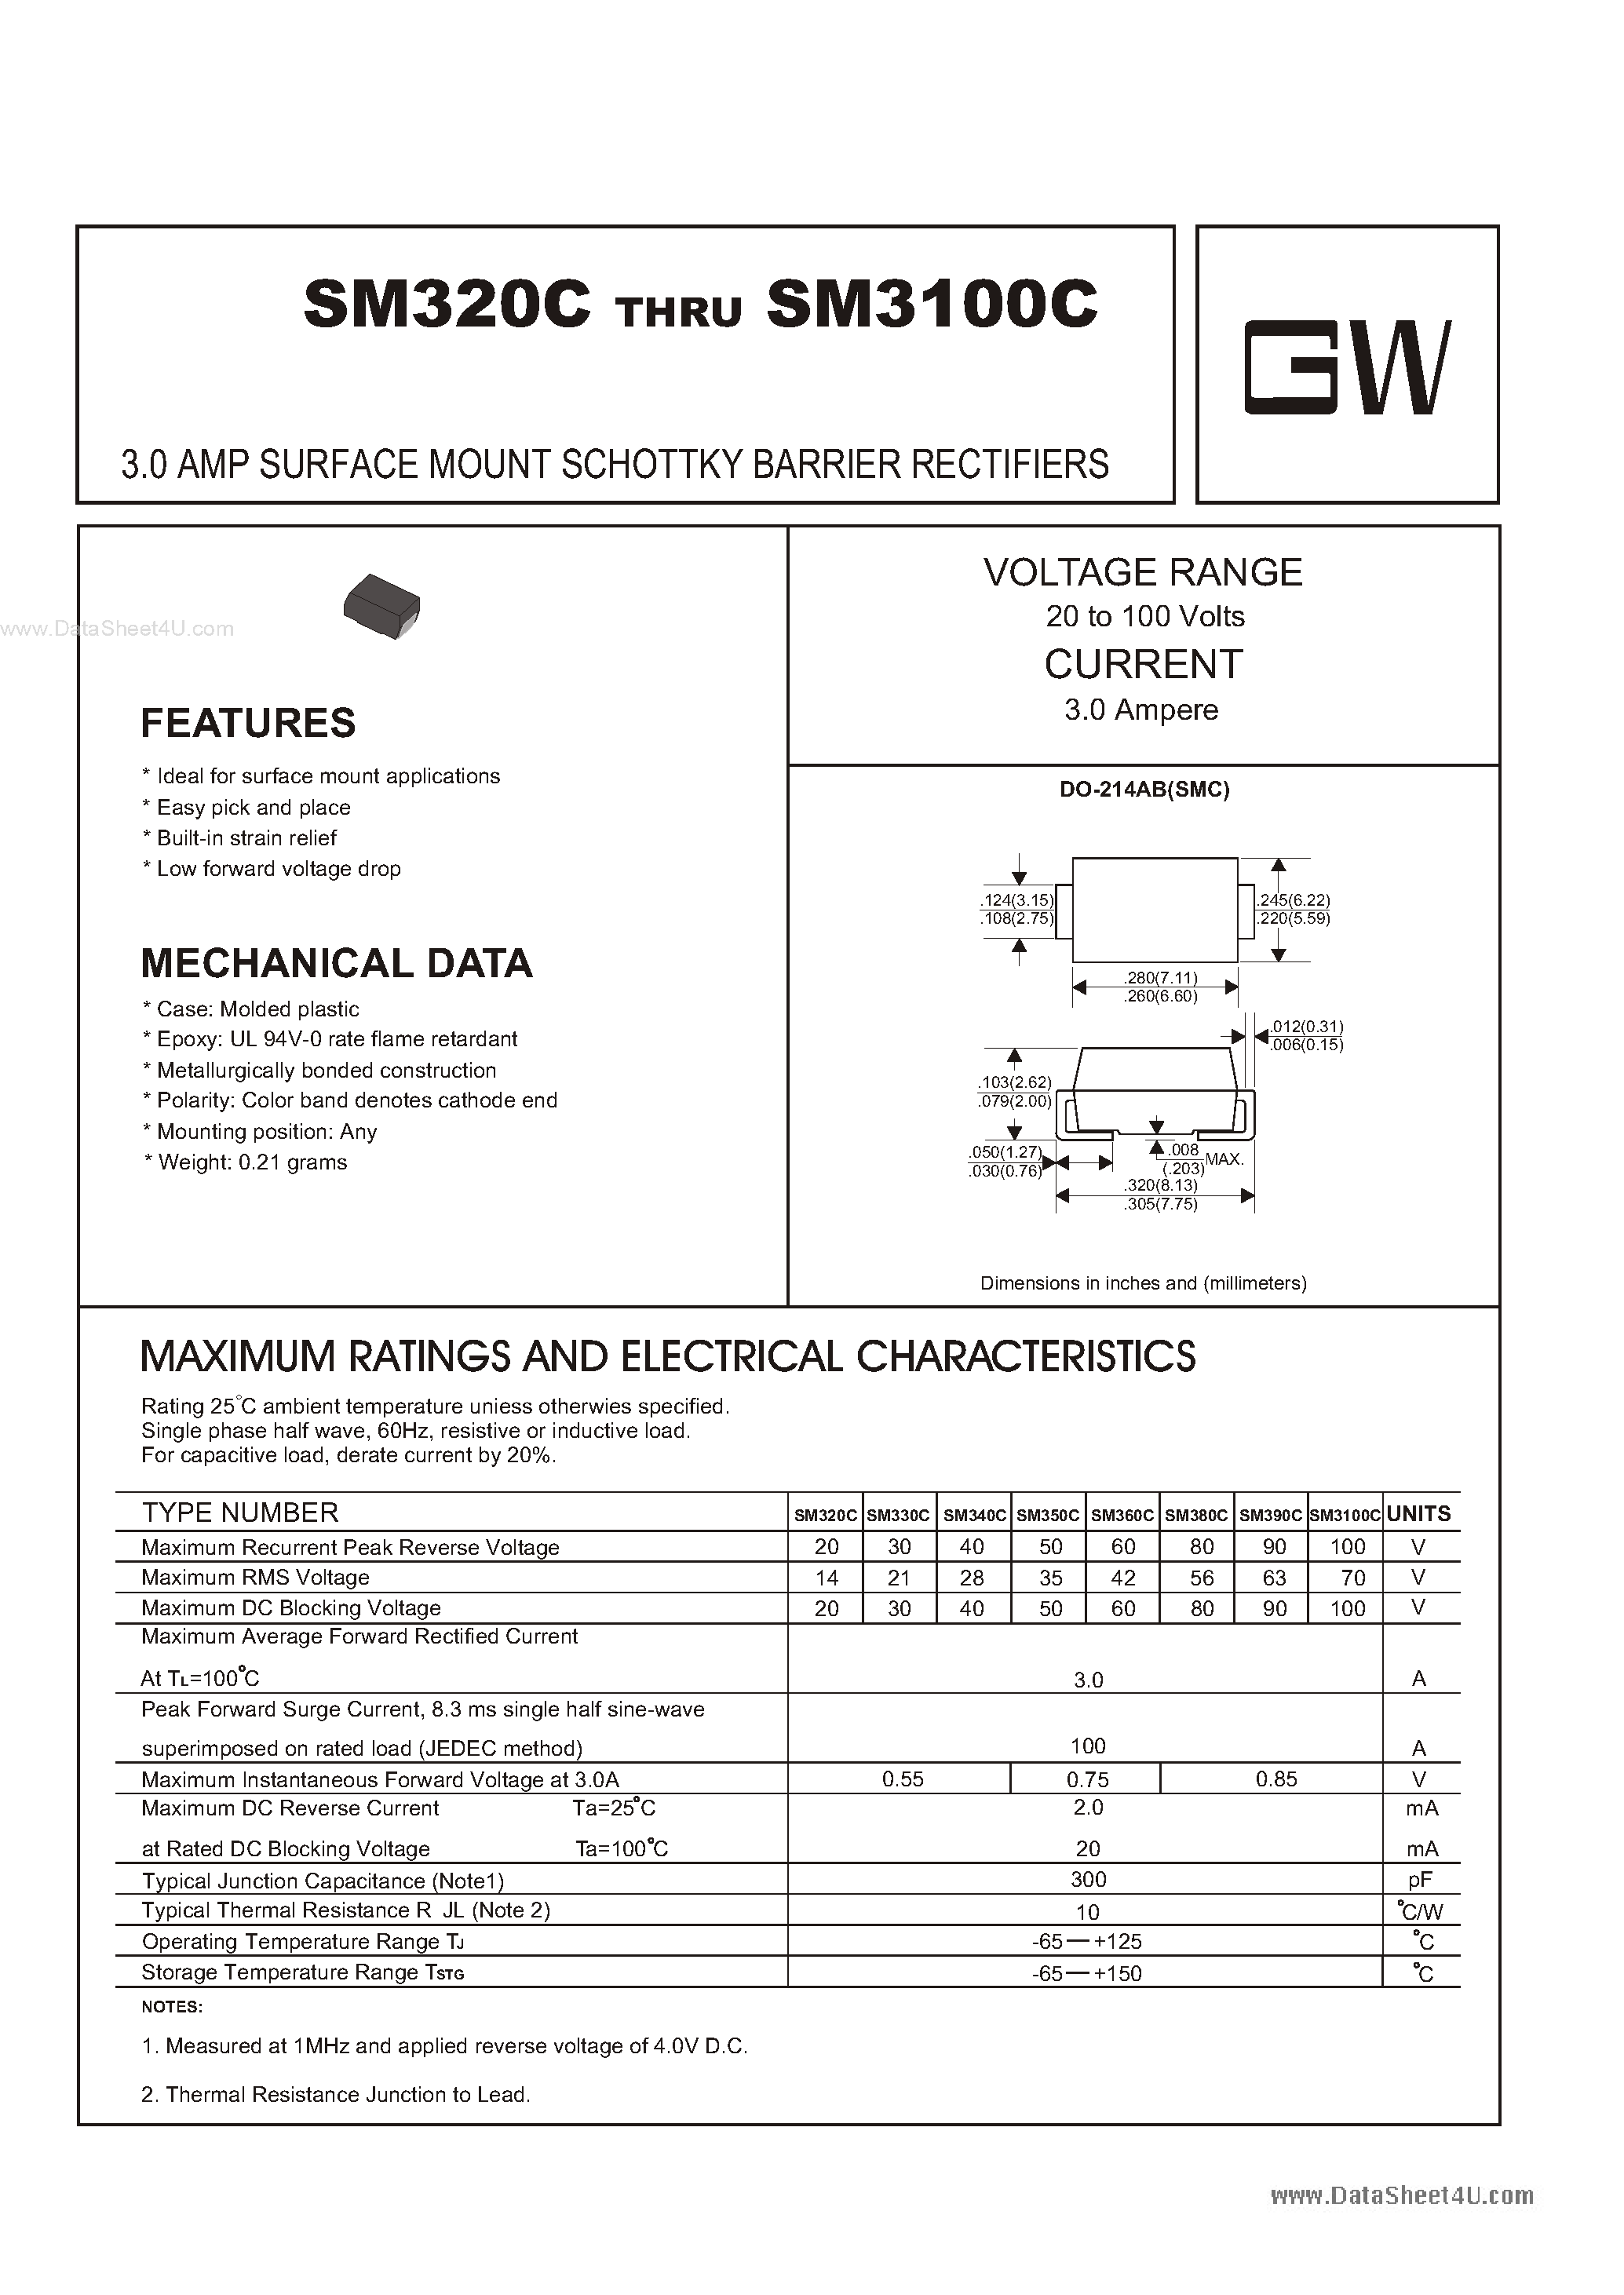 Datasheet SM3100C - (SM320C - SM3100C) 3.0 AMP SURFACE MOUNT SCHOTTKY BARRIER RECTIFIERS page 1